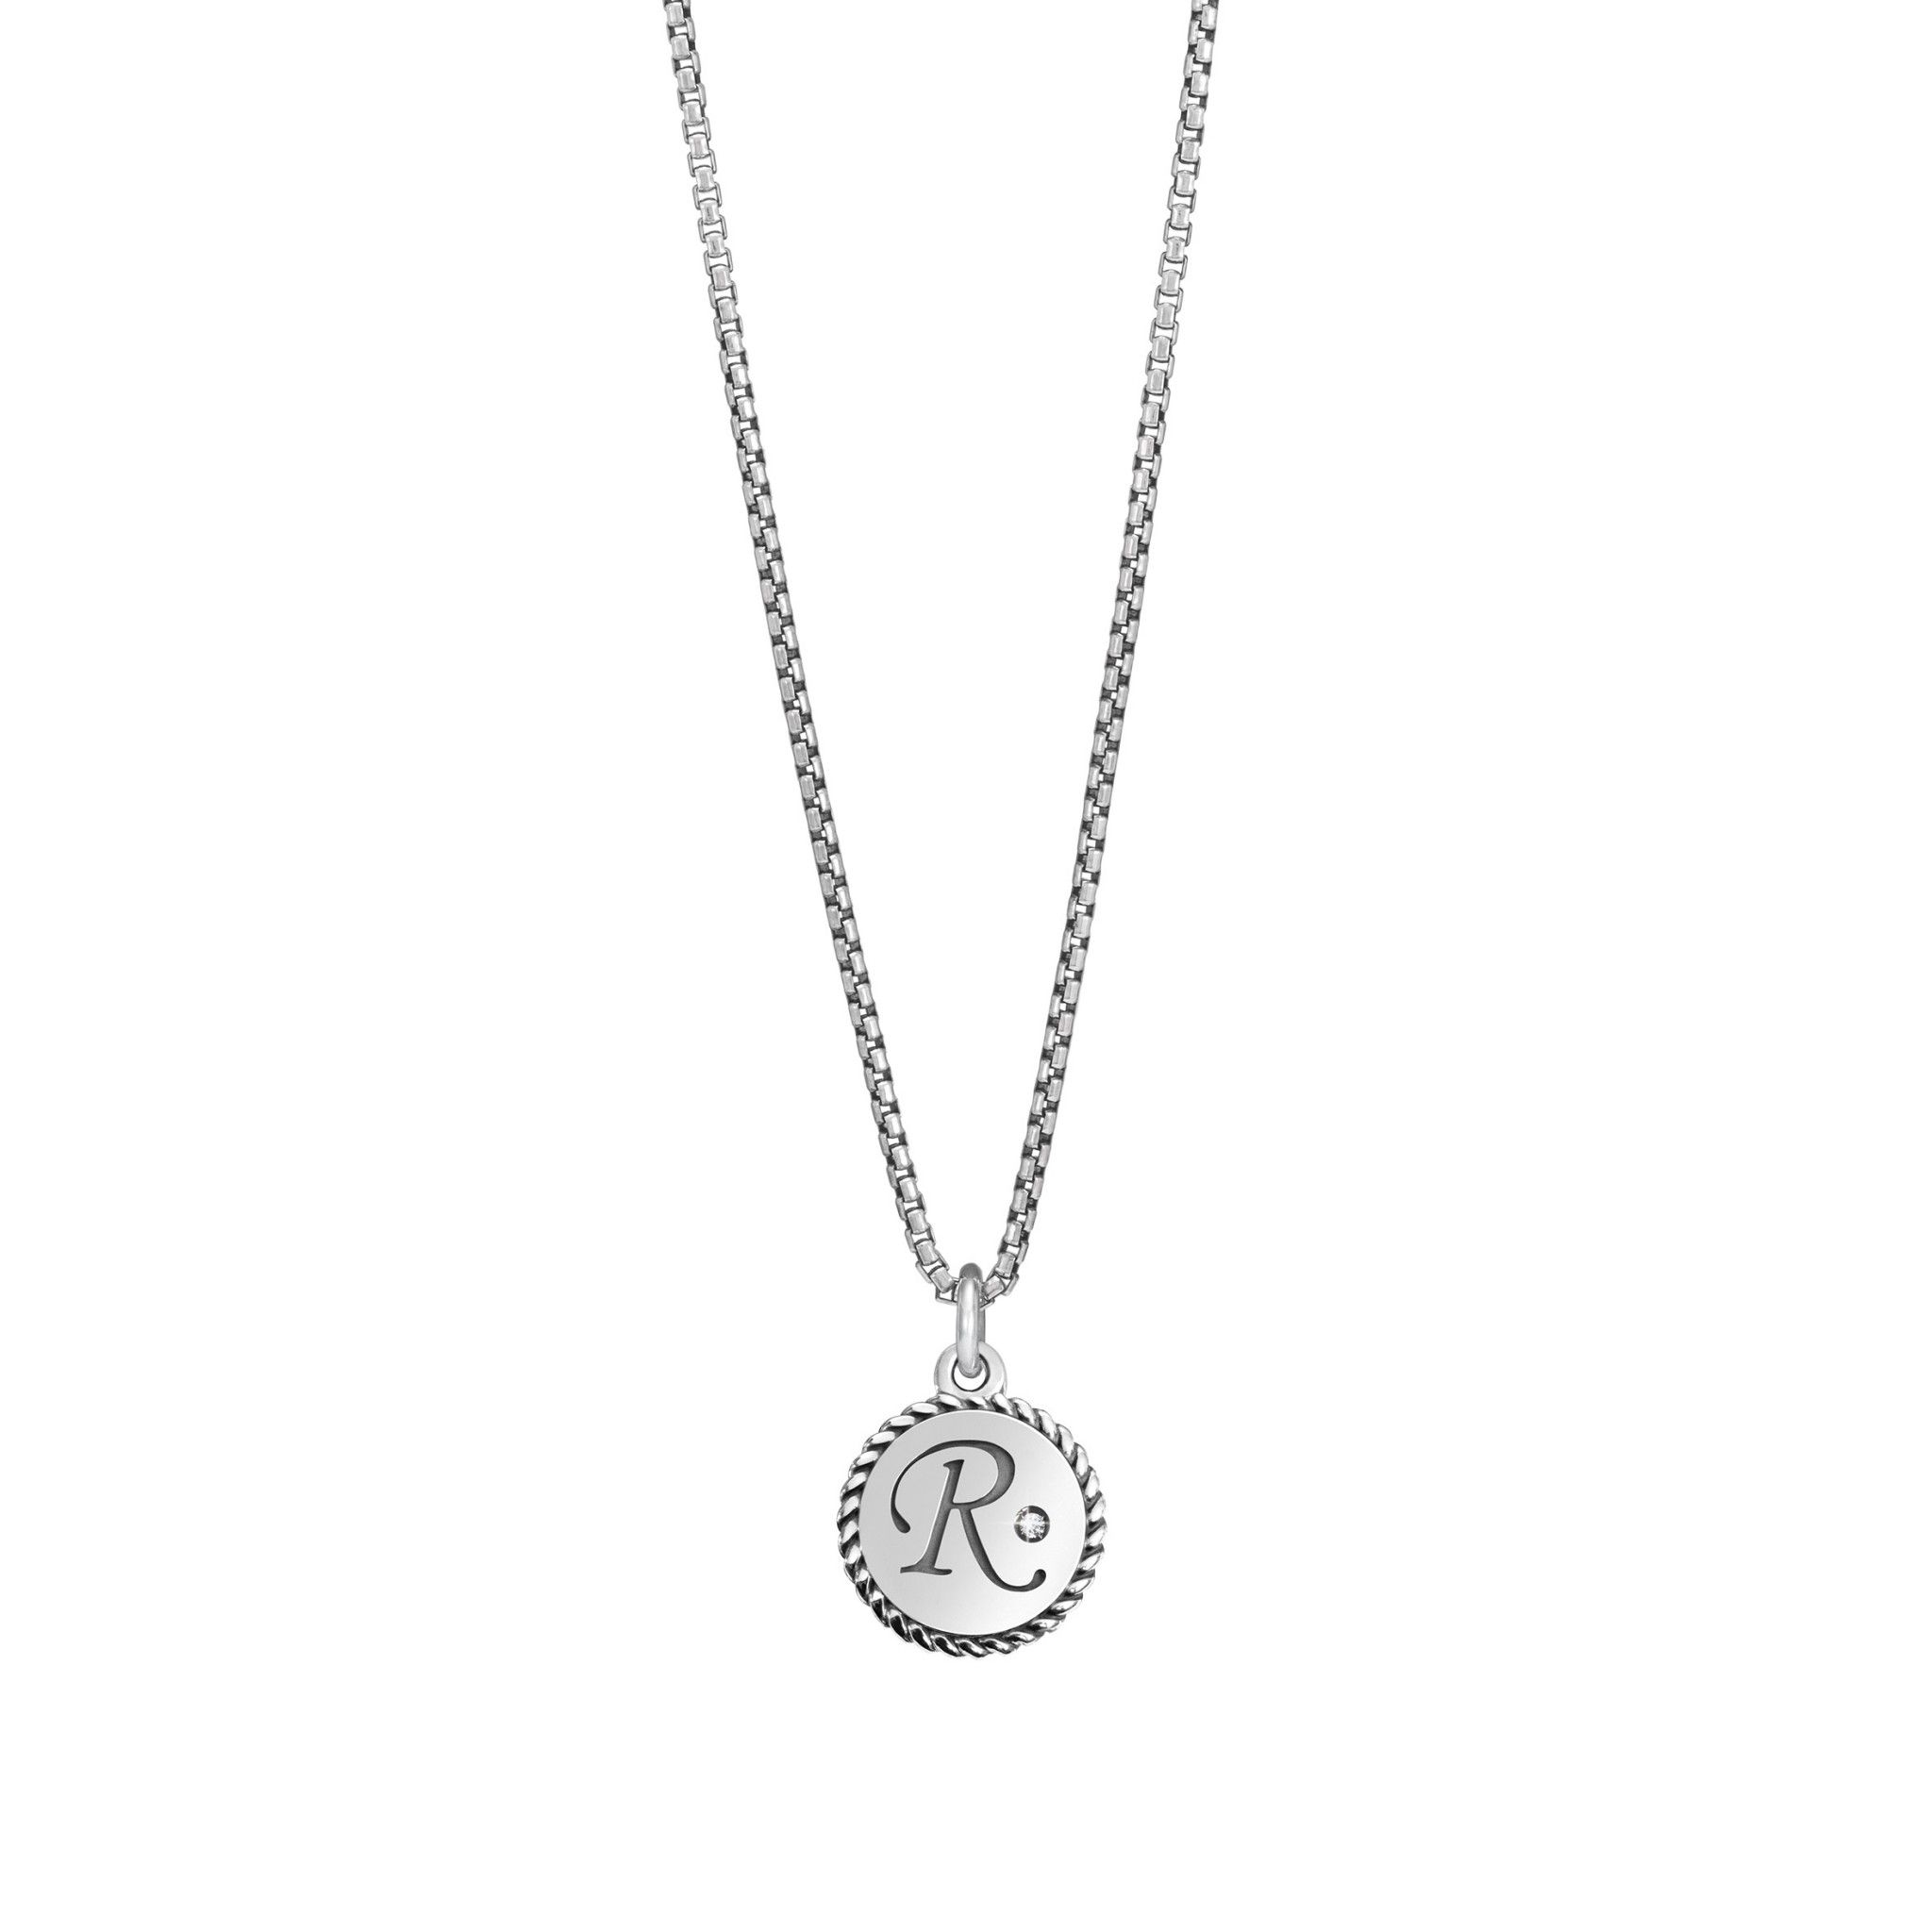 Necklace With Letter R In Silver And Gemstone In Current Letter O Alphabet Locket Element Necklaces (View 6 of 26)